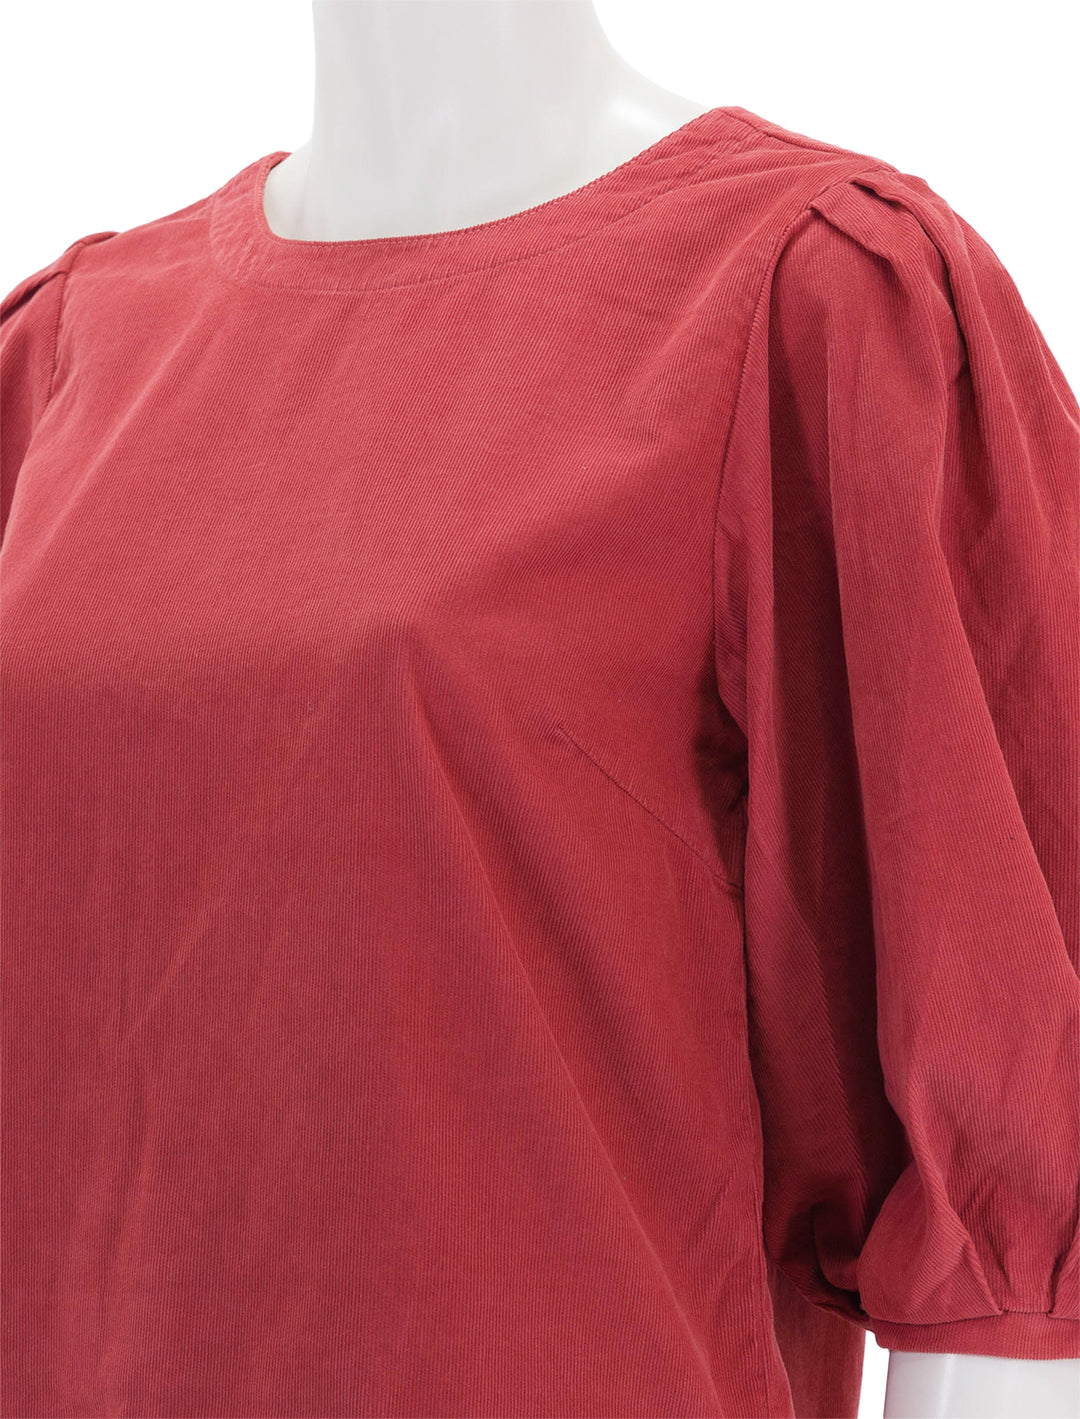 Close-up view of Velvet's tarah top in chili cord.